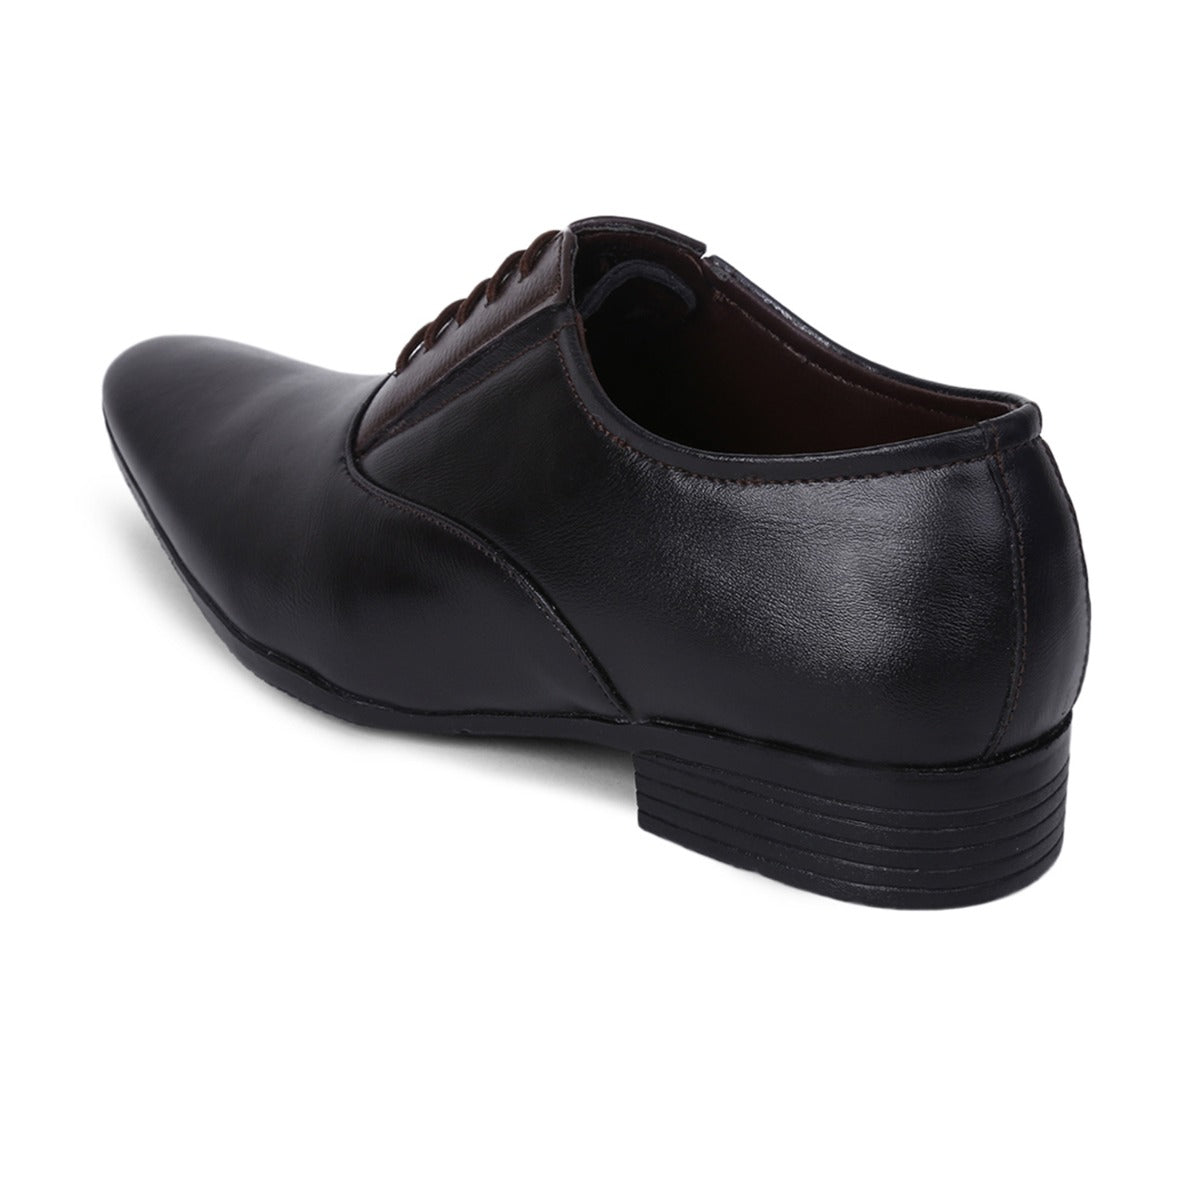 Paragon RK11233G Men Formal Shoes | Corporate Office Shoes | Smart &amp; Sleek Design | Comfortable Sole with Cushioning | Daily &amp; Occasion Wear